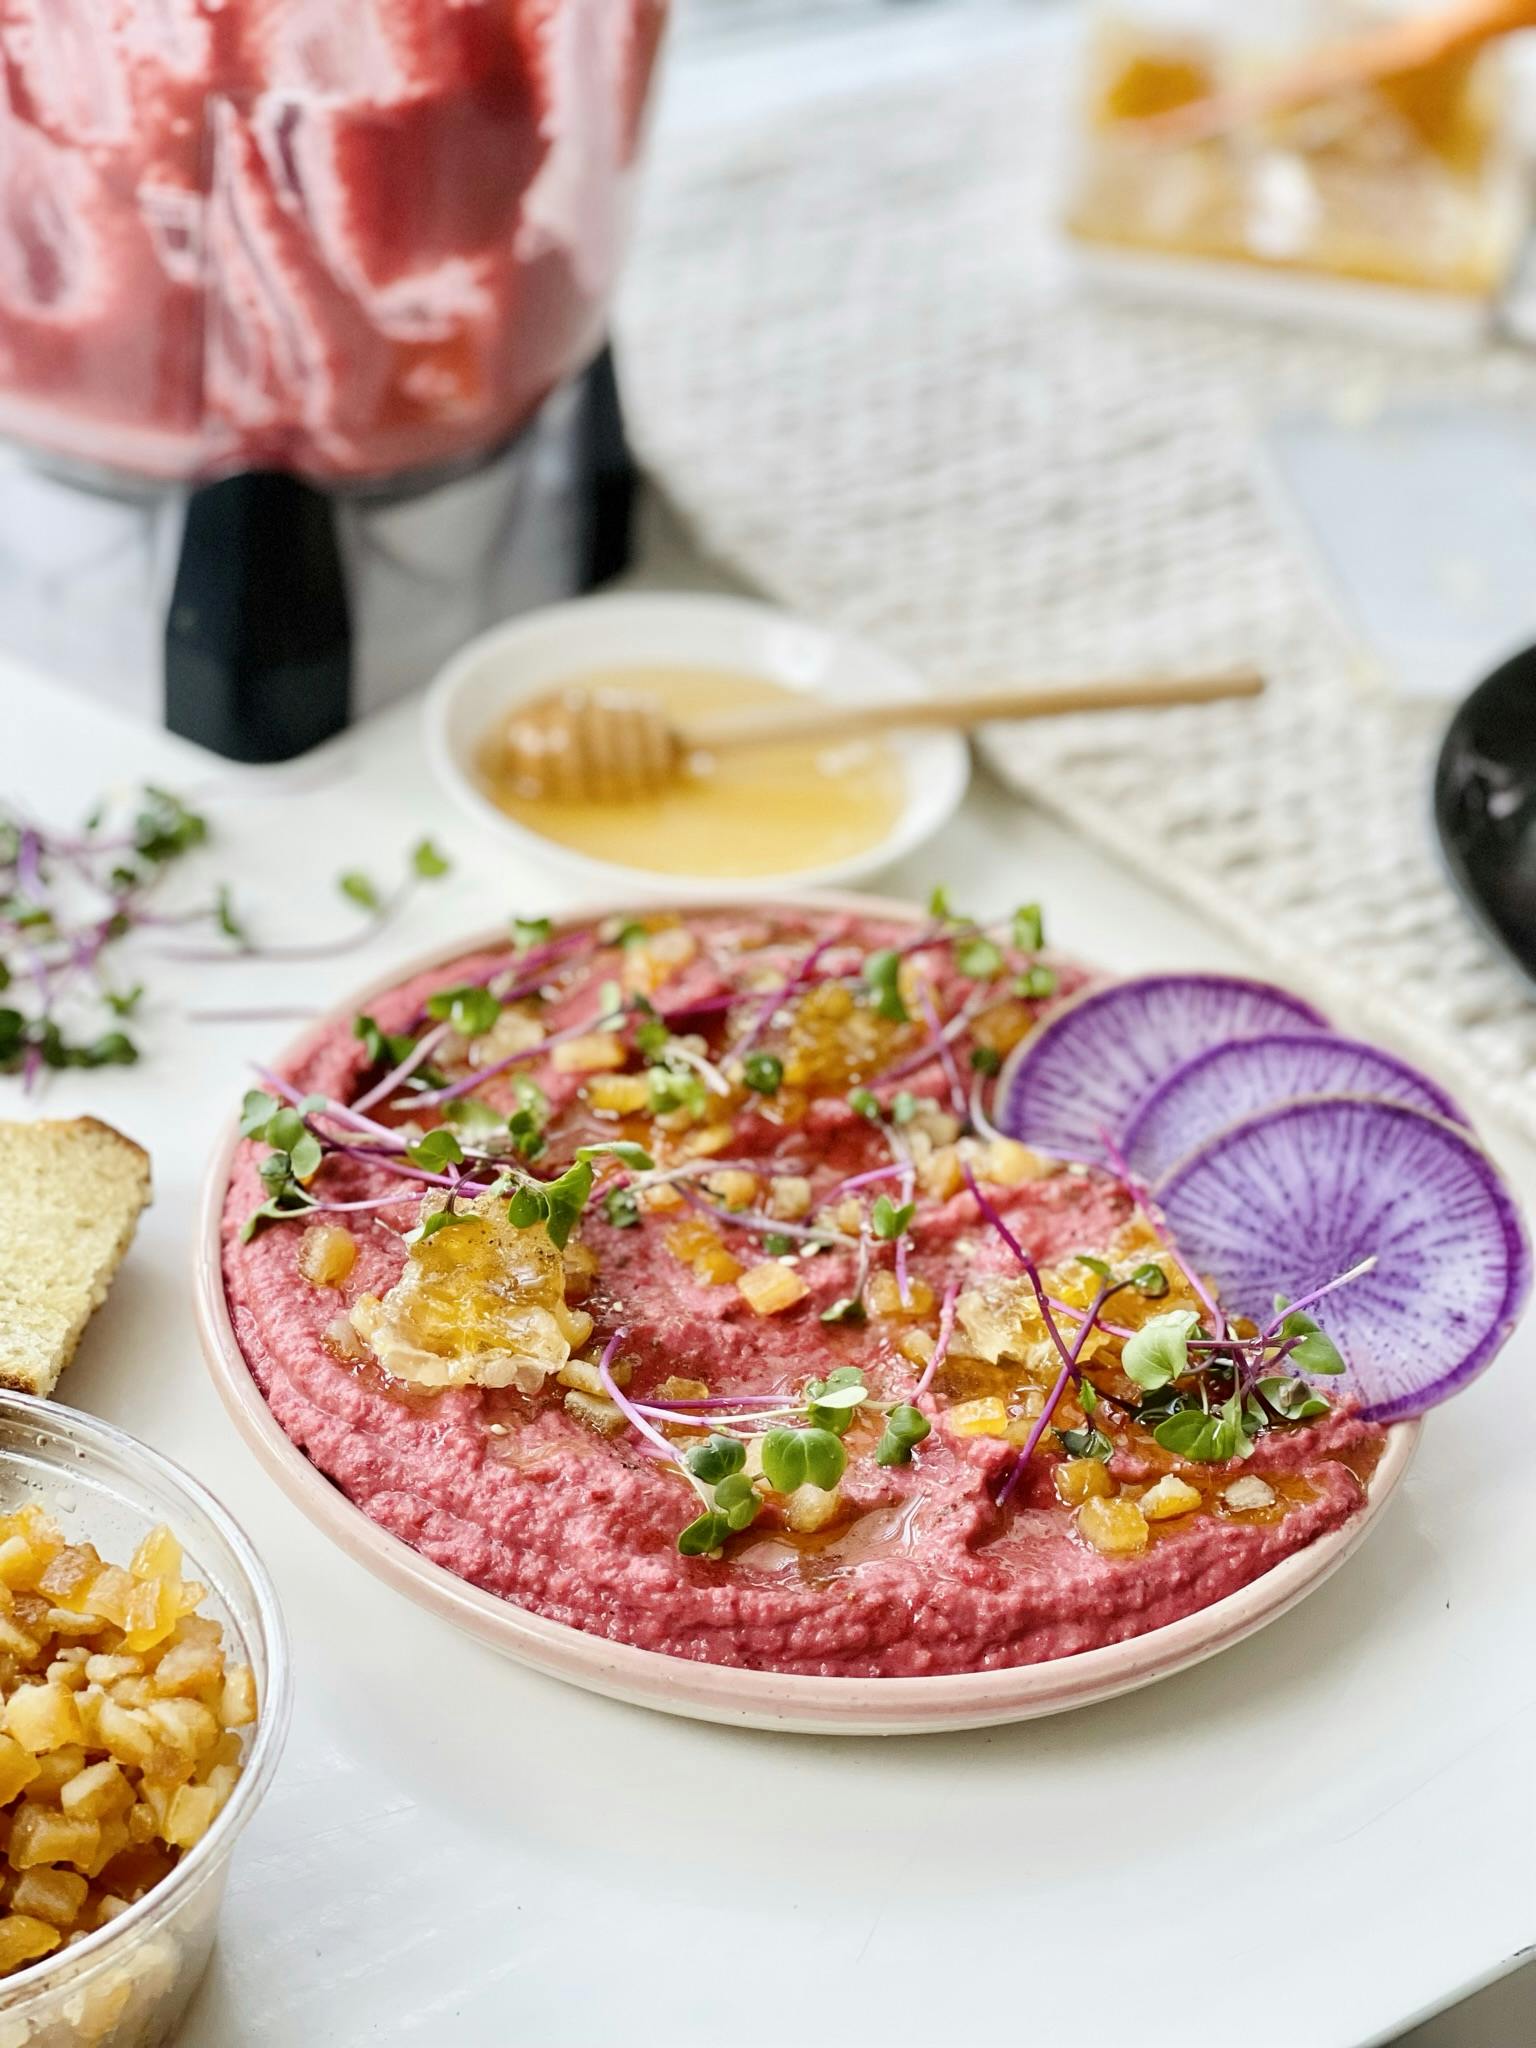 Picture for Beet Hummus